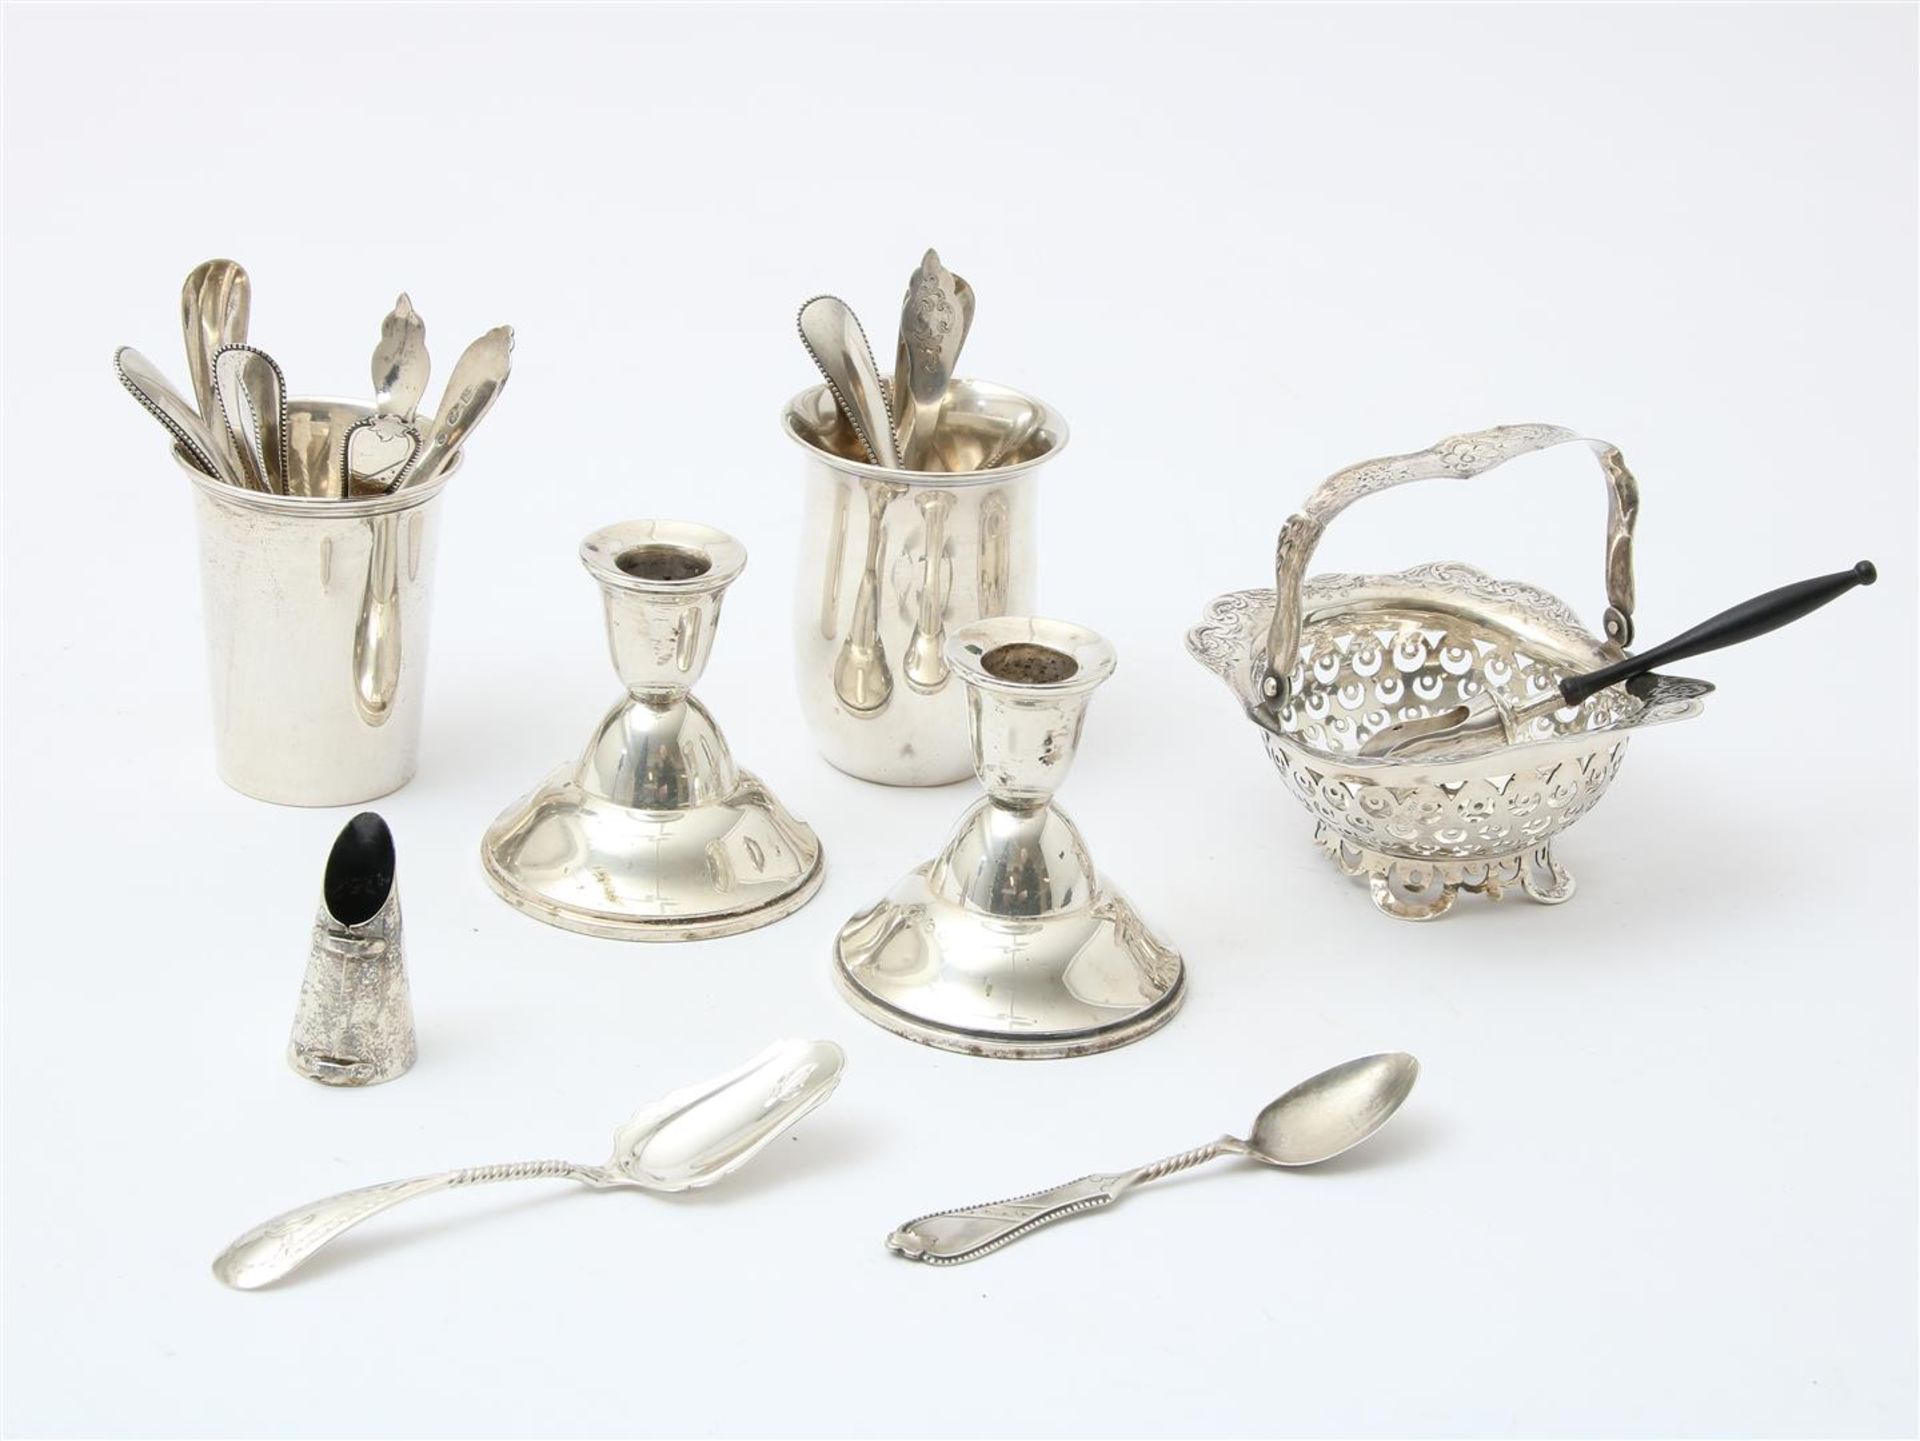 Lot of silverware including 2 cups